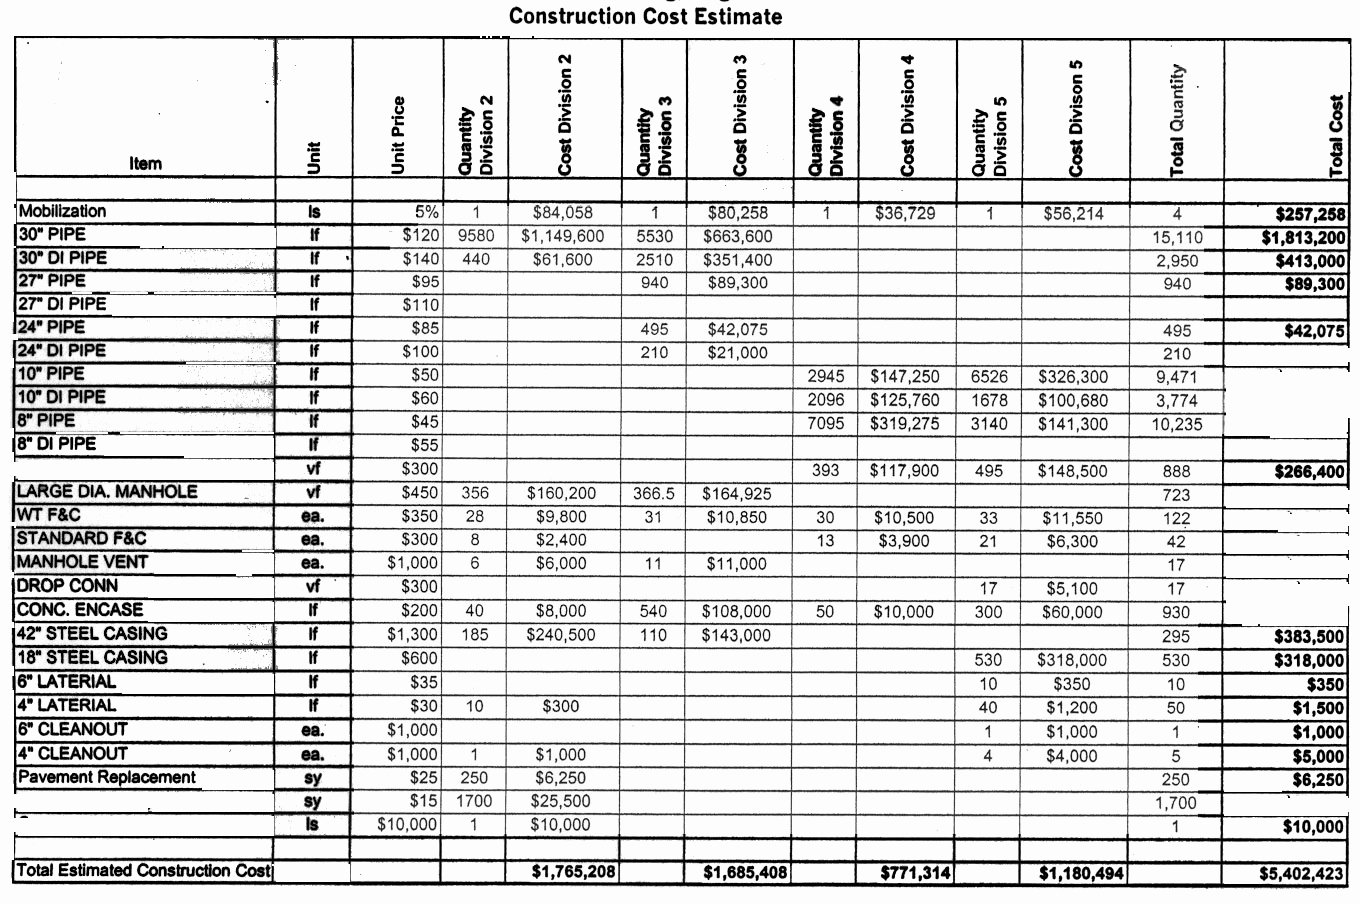 Construction Cost Estimate Template Lovely Estimate Spreadsheet Template Spreadsheet Templates for